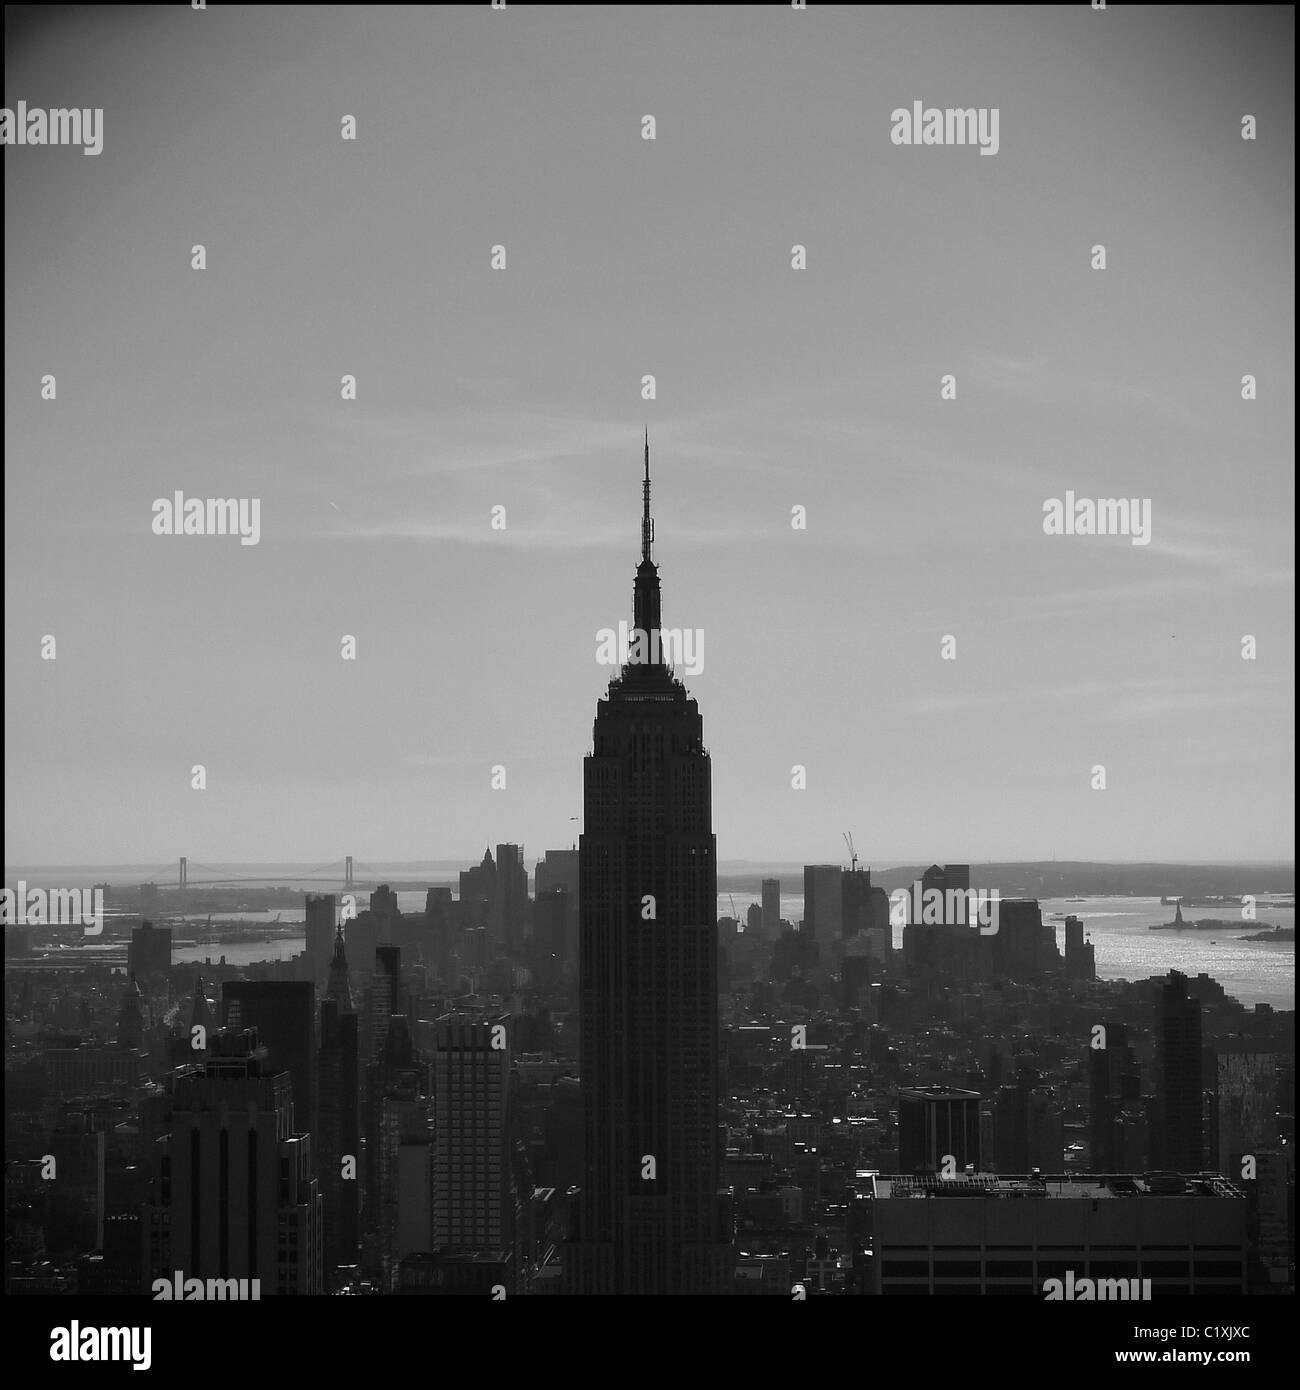 American Cities, Empire State Building, New York City USA. Stock Photo